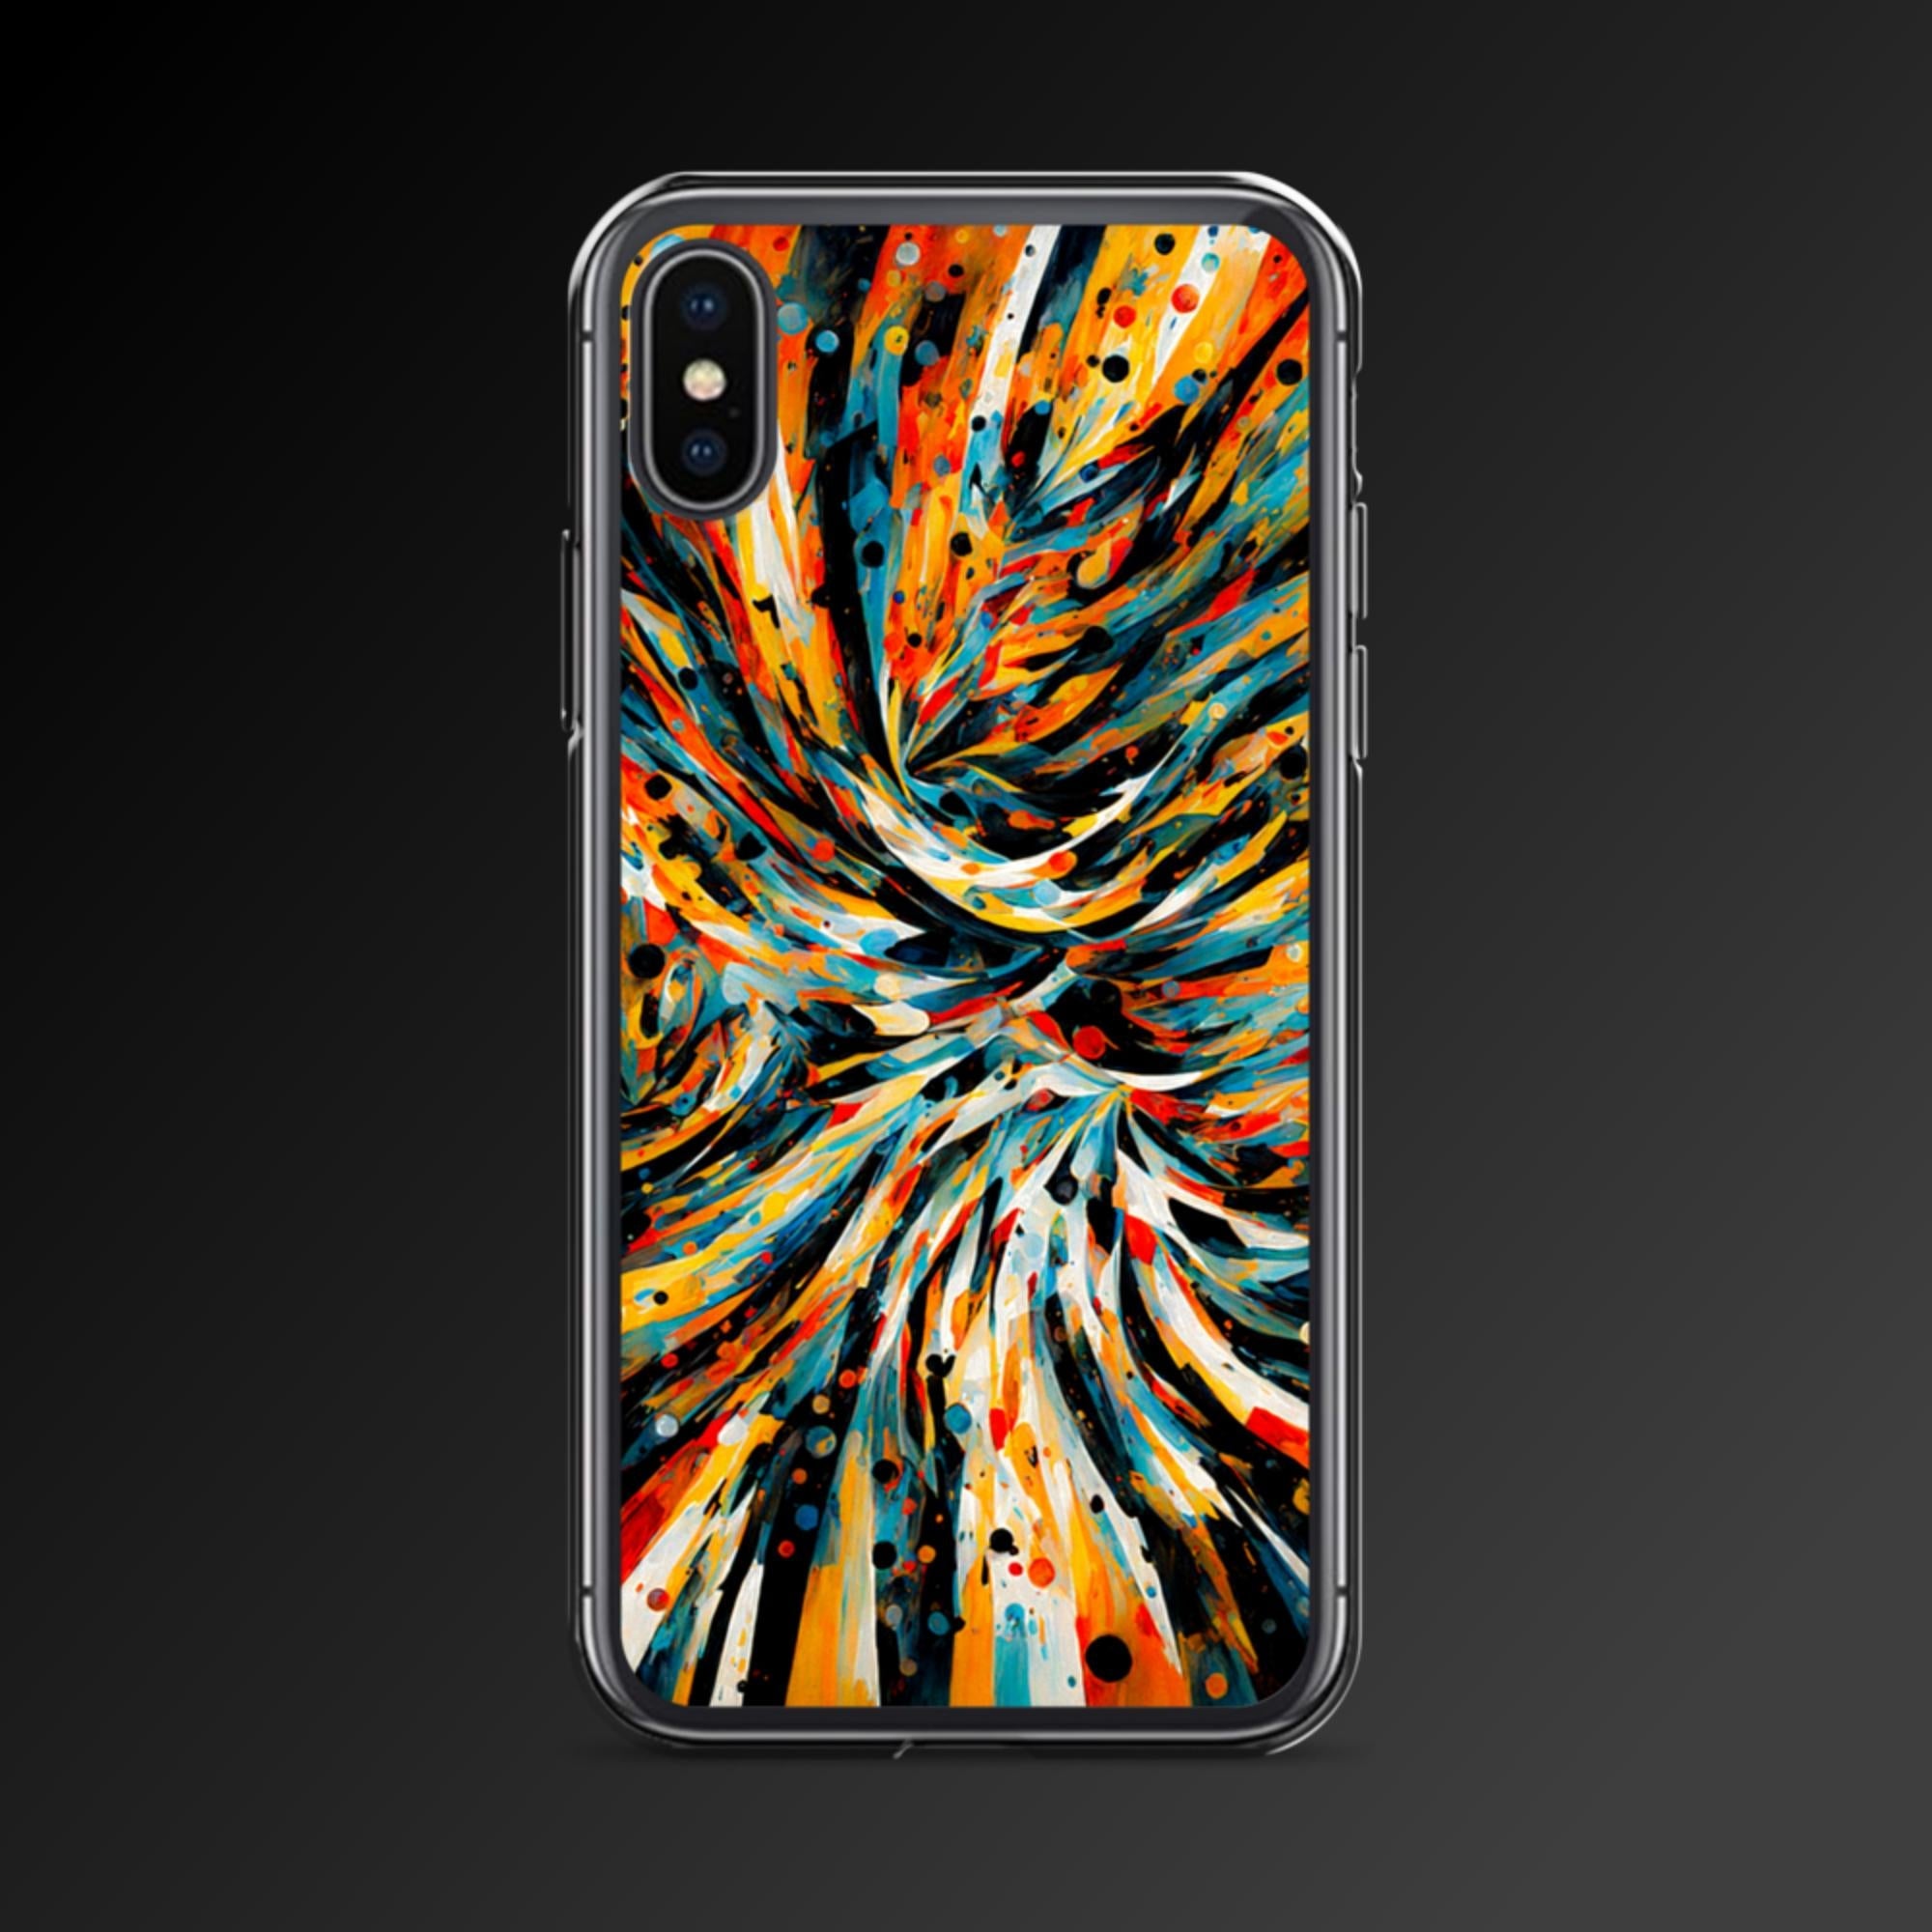 "Losing yourself" clear iphone cases - Clear iphone case - Ever colorful